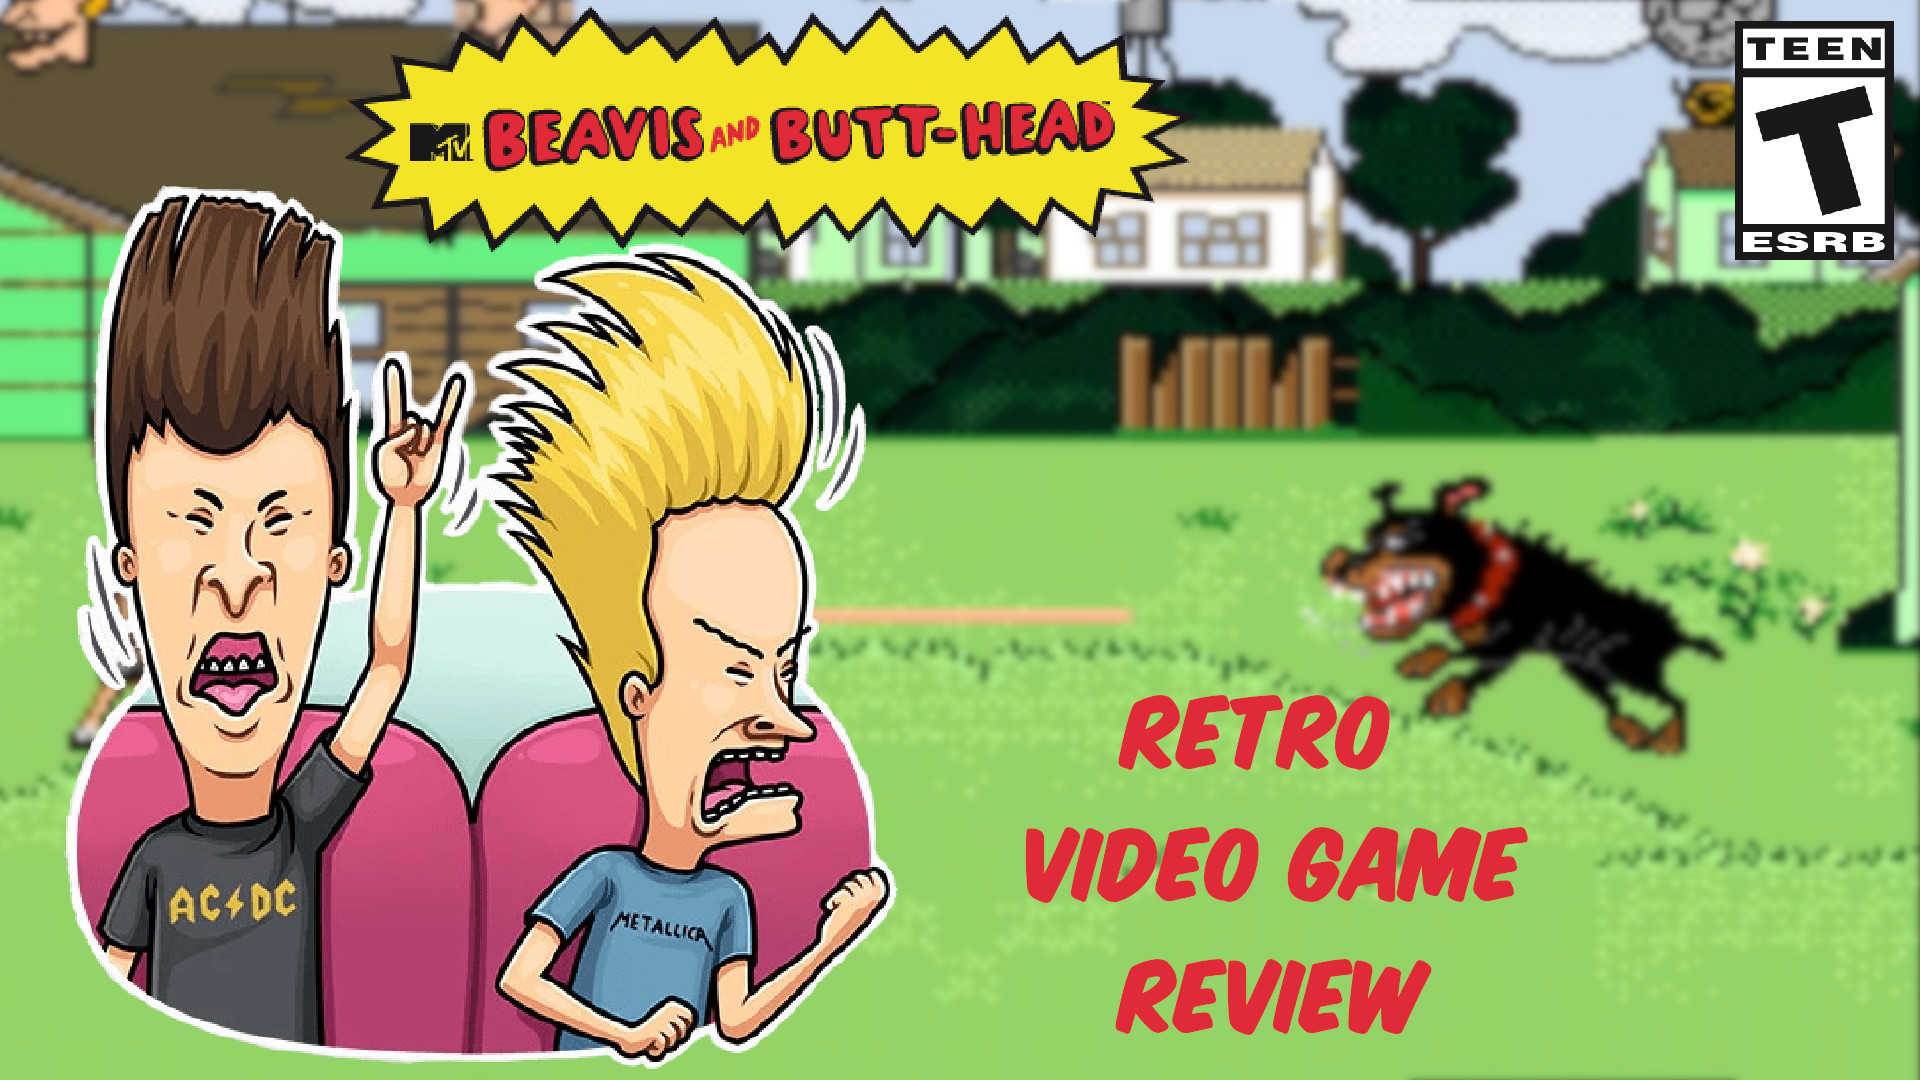 Beavis and Butt-Head is an iconic 90s cartoon that had movies, comics, and ...